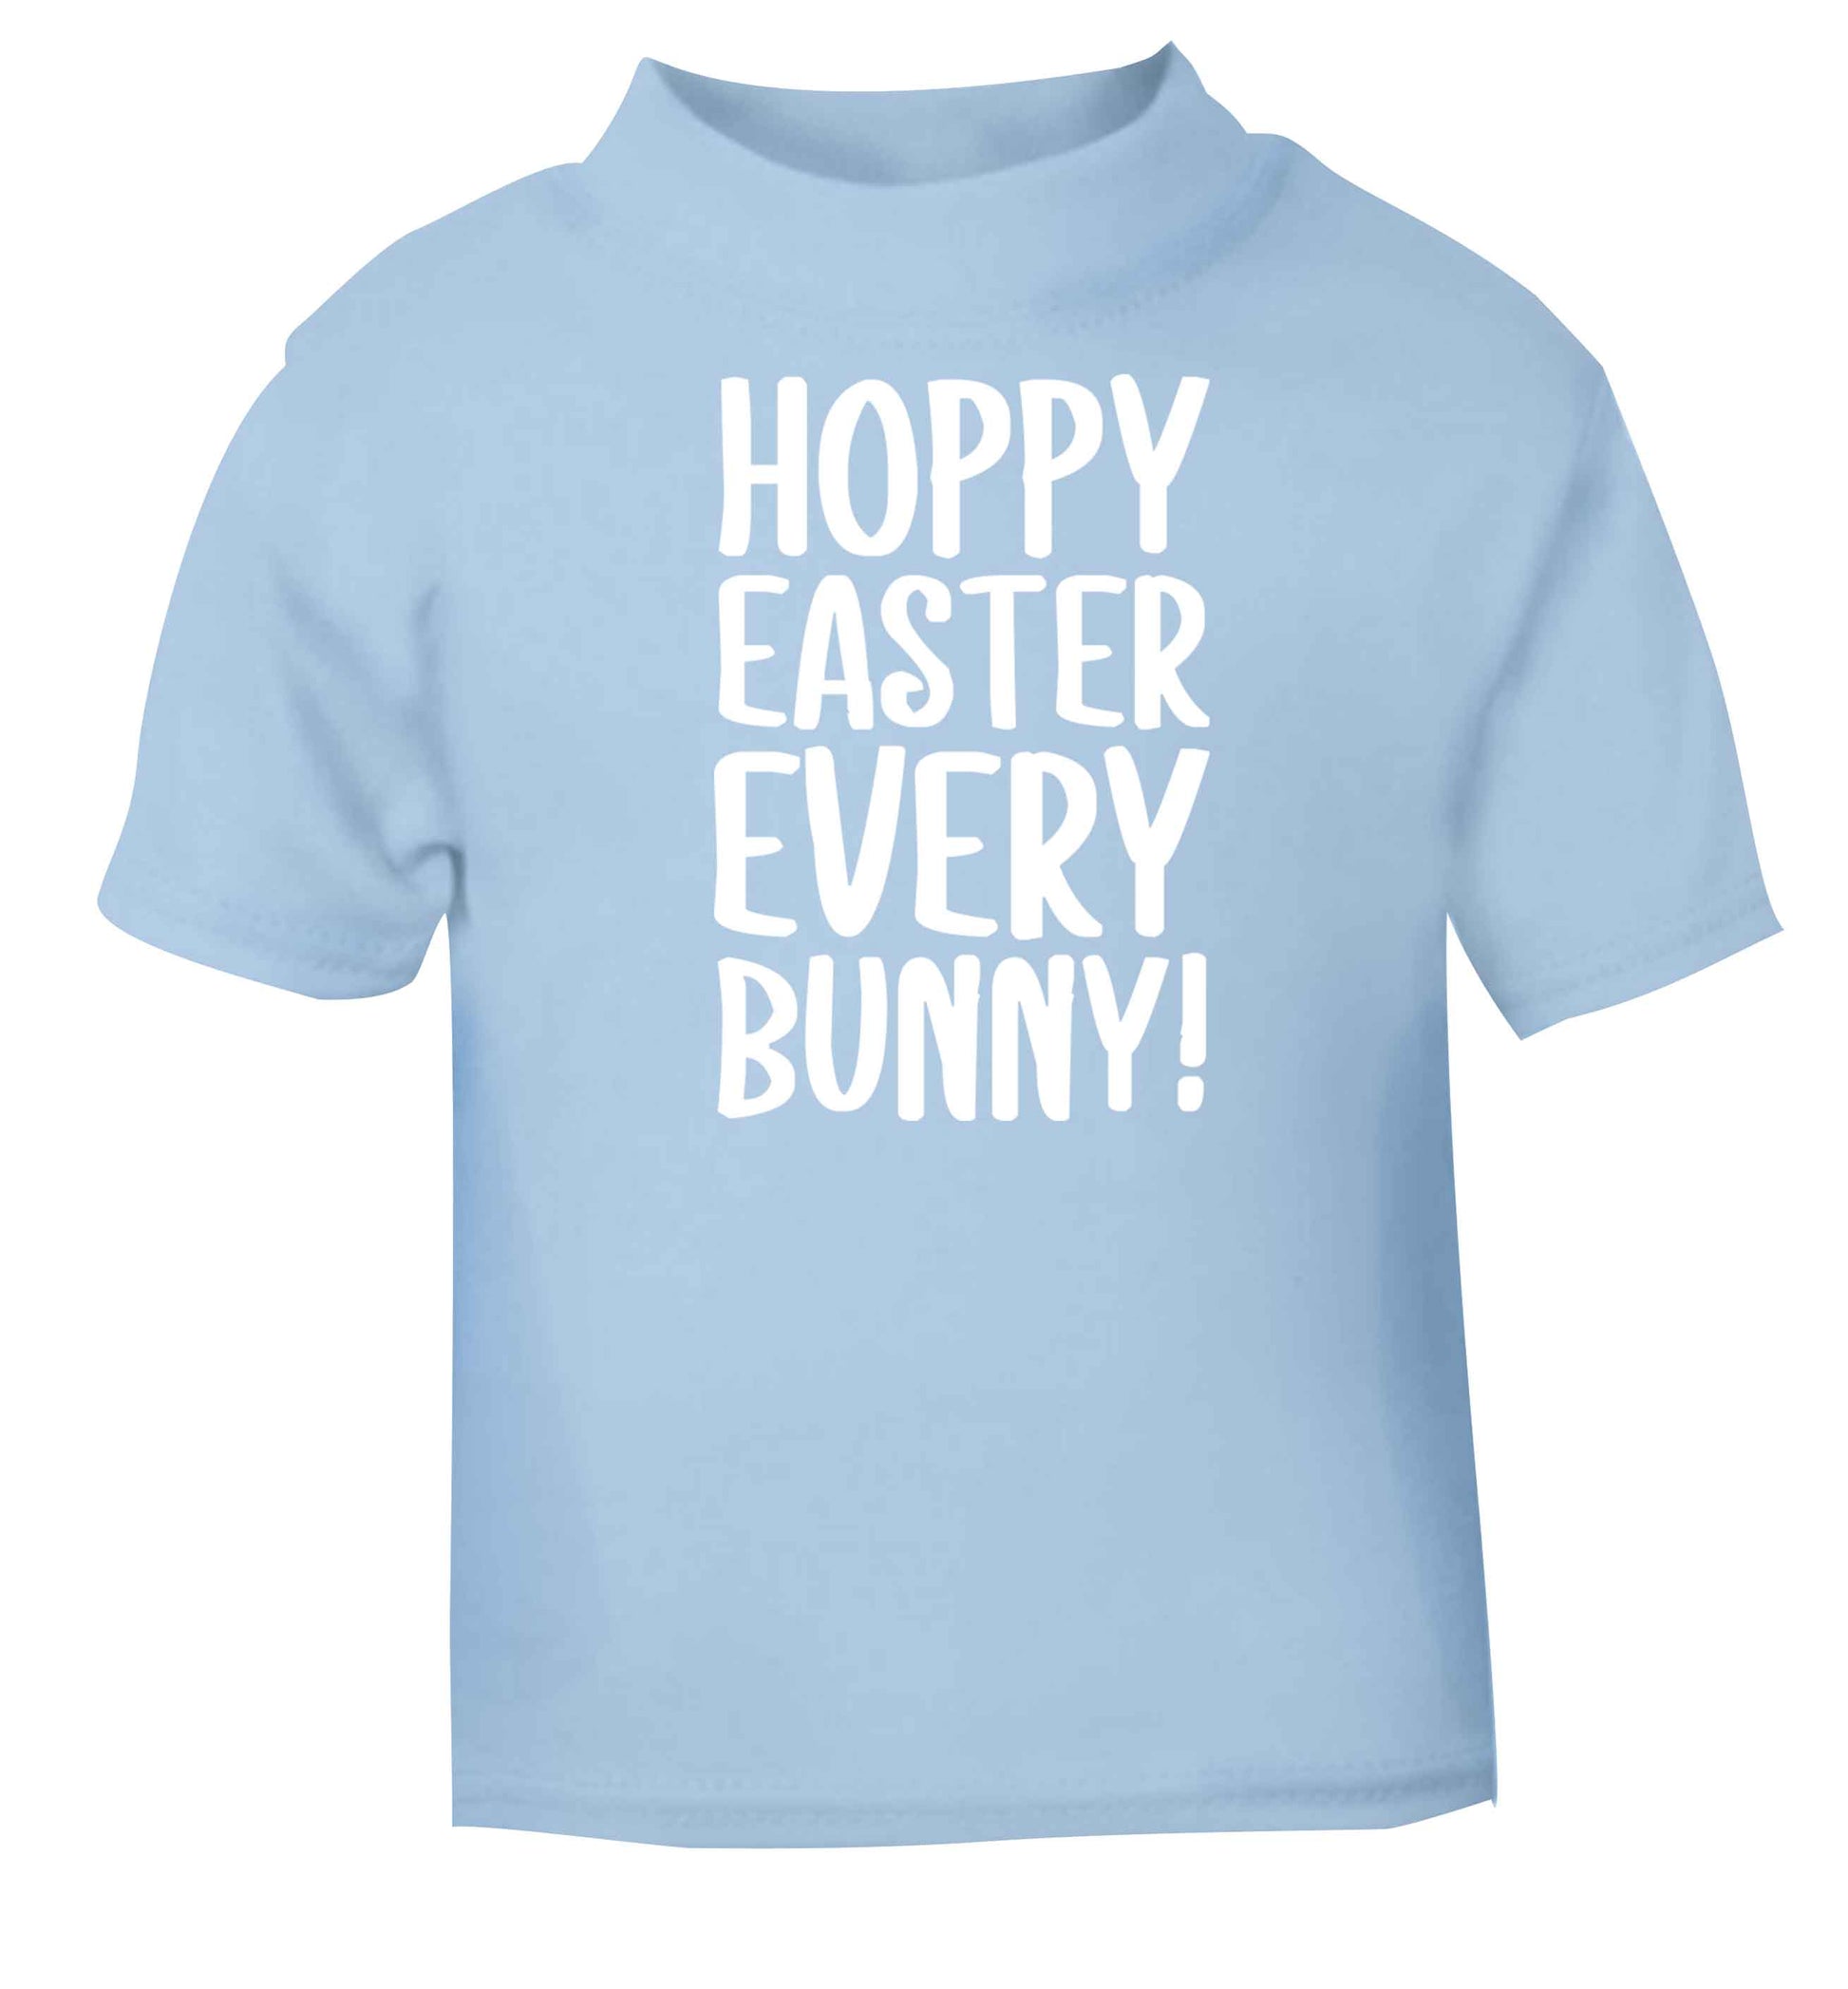 Hoppy Easter every bunny! light blue baby toddler Tshirt 2 Years